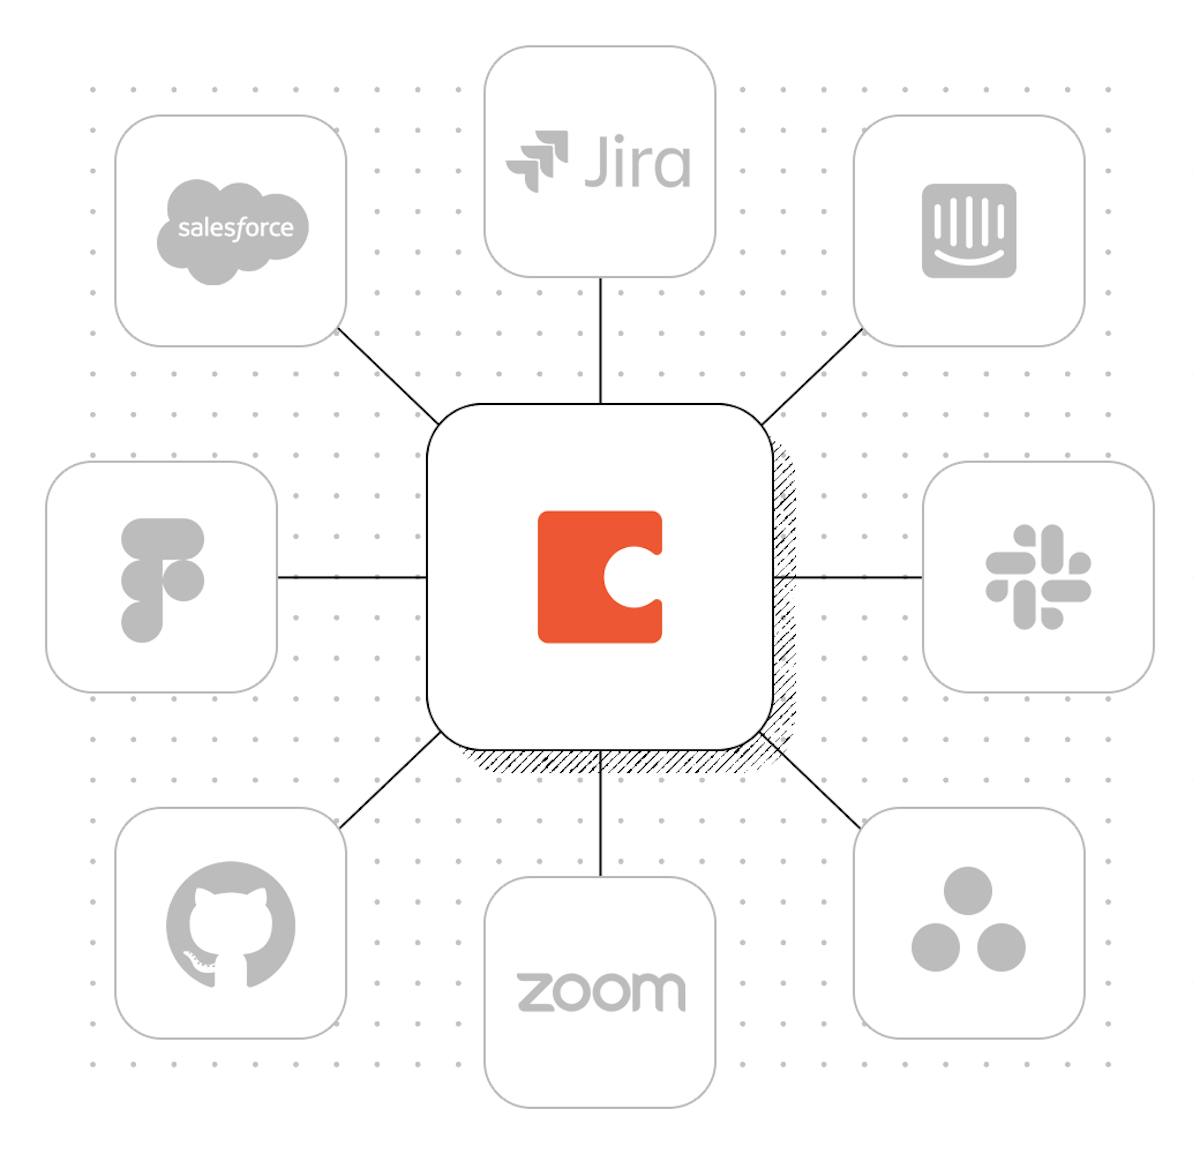 The Coda logo surrounded by logos of Slack, Jira, Zoom, Salesforce, Asana, and more. Coda connects your data.